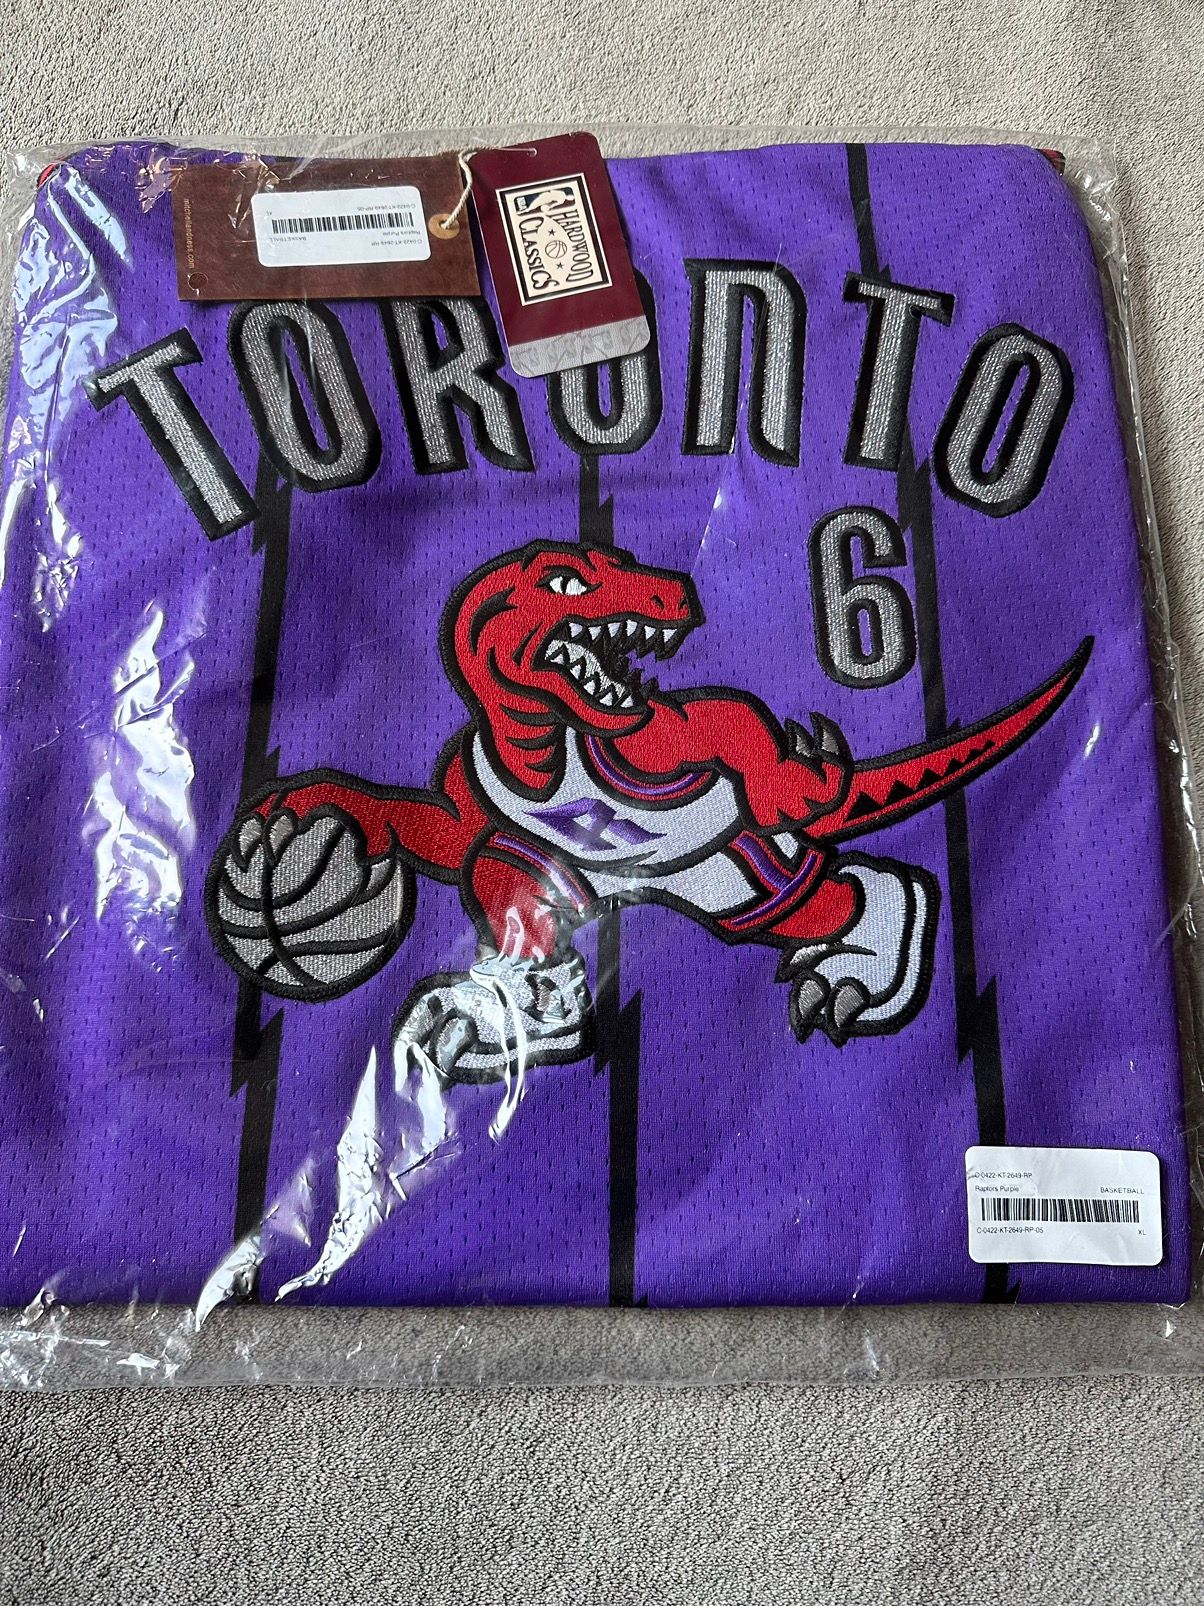 Octobers Very Own OVO Toronto Raptors x Mitchell & Ness Basketball Jersey Size US XL / EU 56 / 4 - 1 Preview